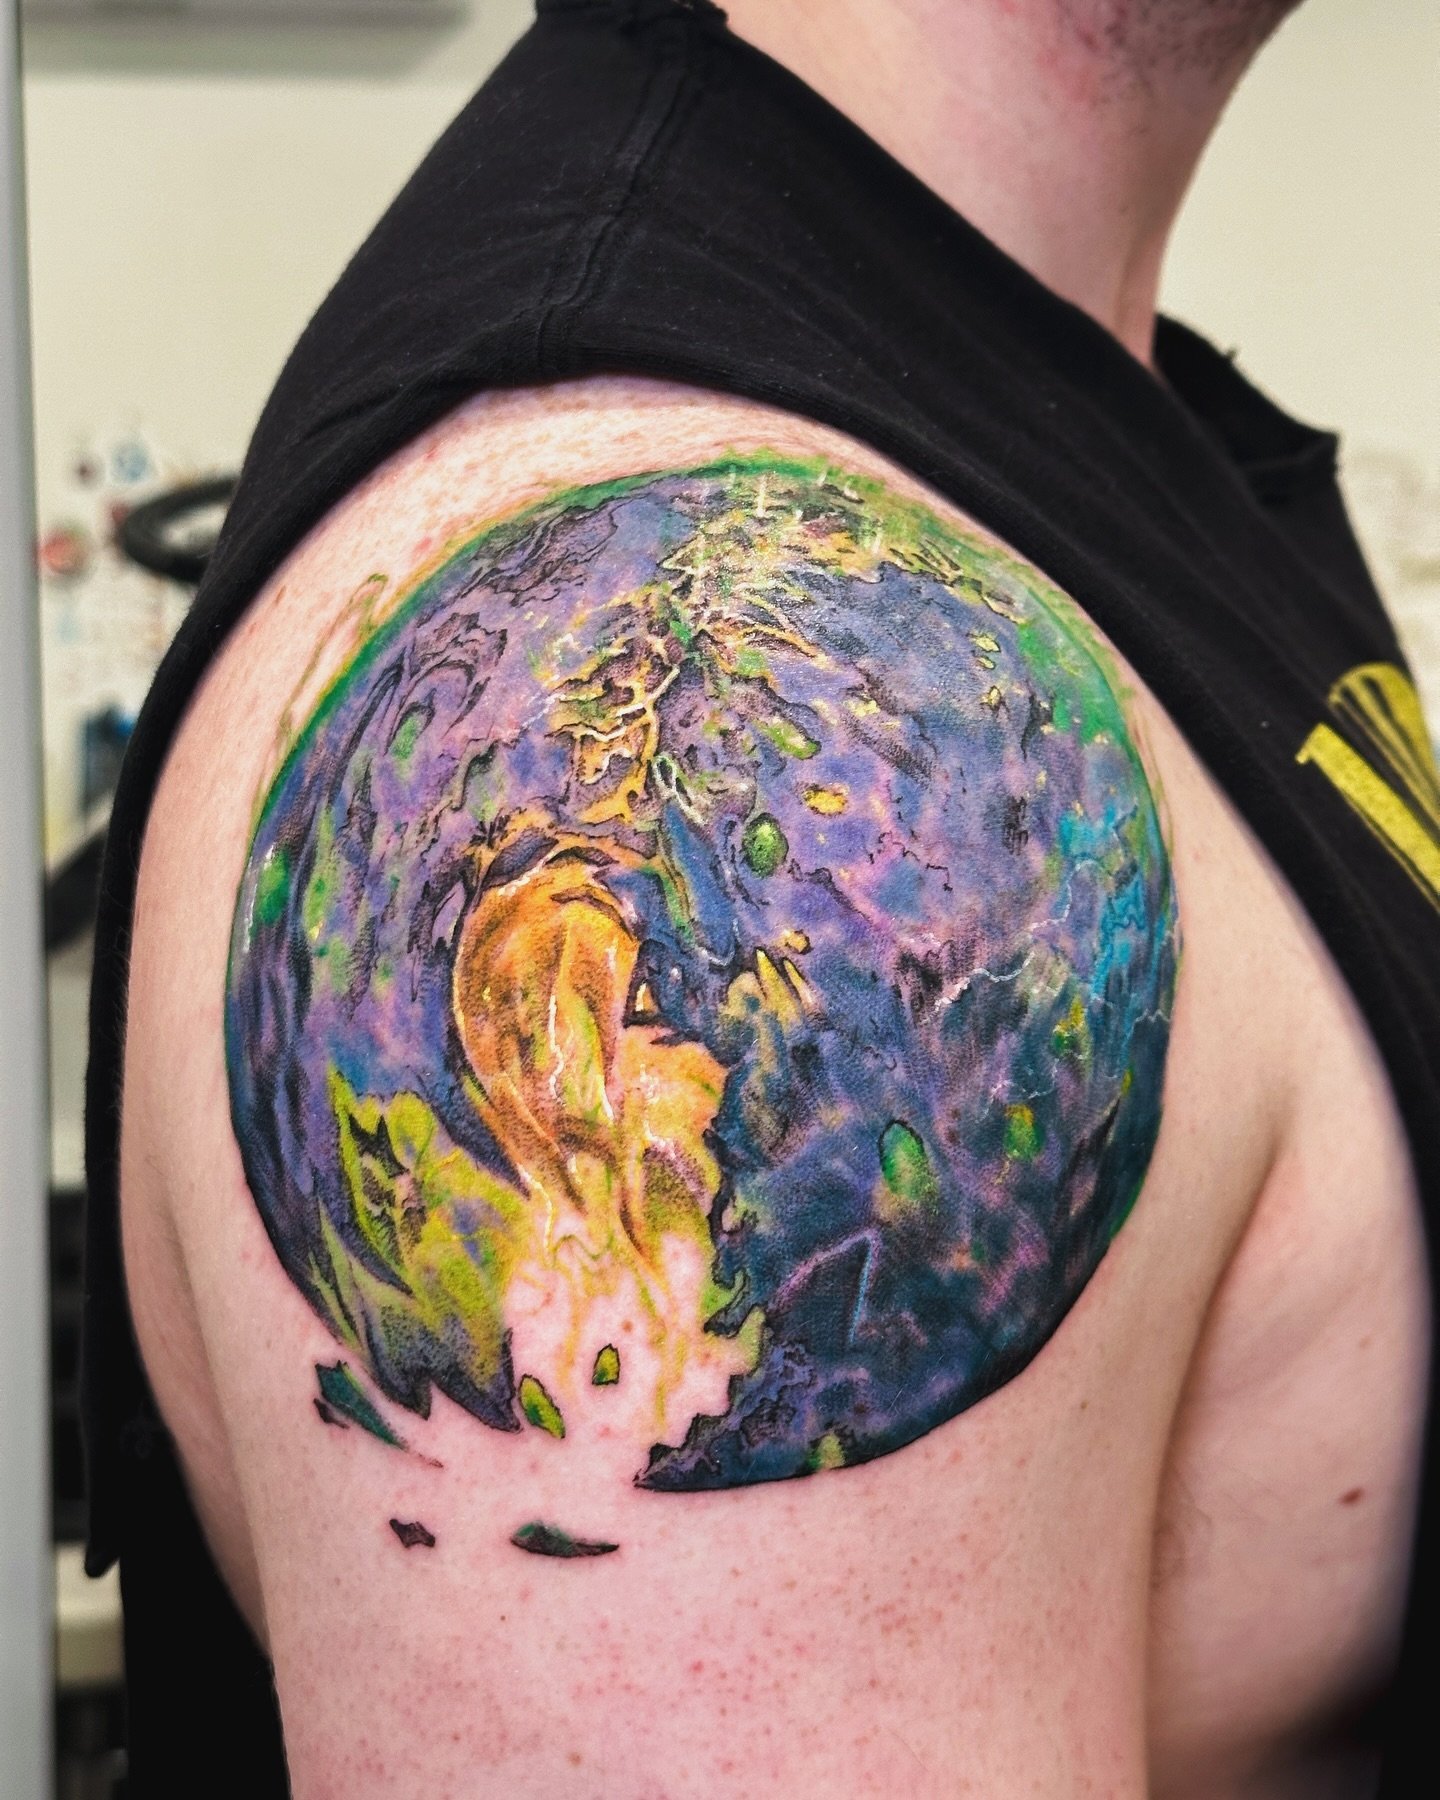 Argus, the Broken Planet. Burning legion atrocity 

One of my absolute favorite expansions for @warcraft, brought to life on skin! Legion holds a special place in my heart. Thank you so much for your trust Zack. 

Done @cakeisalietattoo 🍰 ⁣
.⁣
.⁣
.⁣